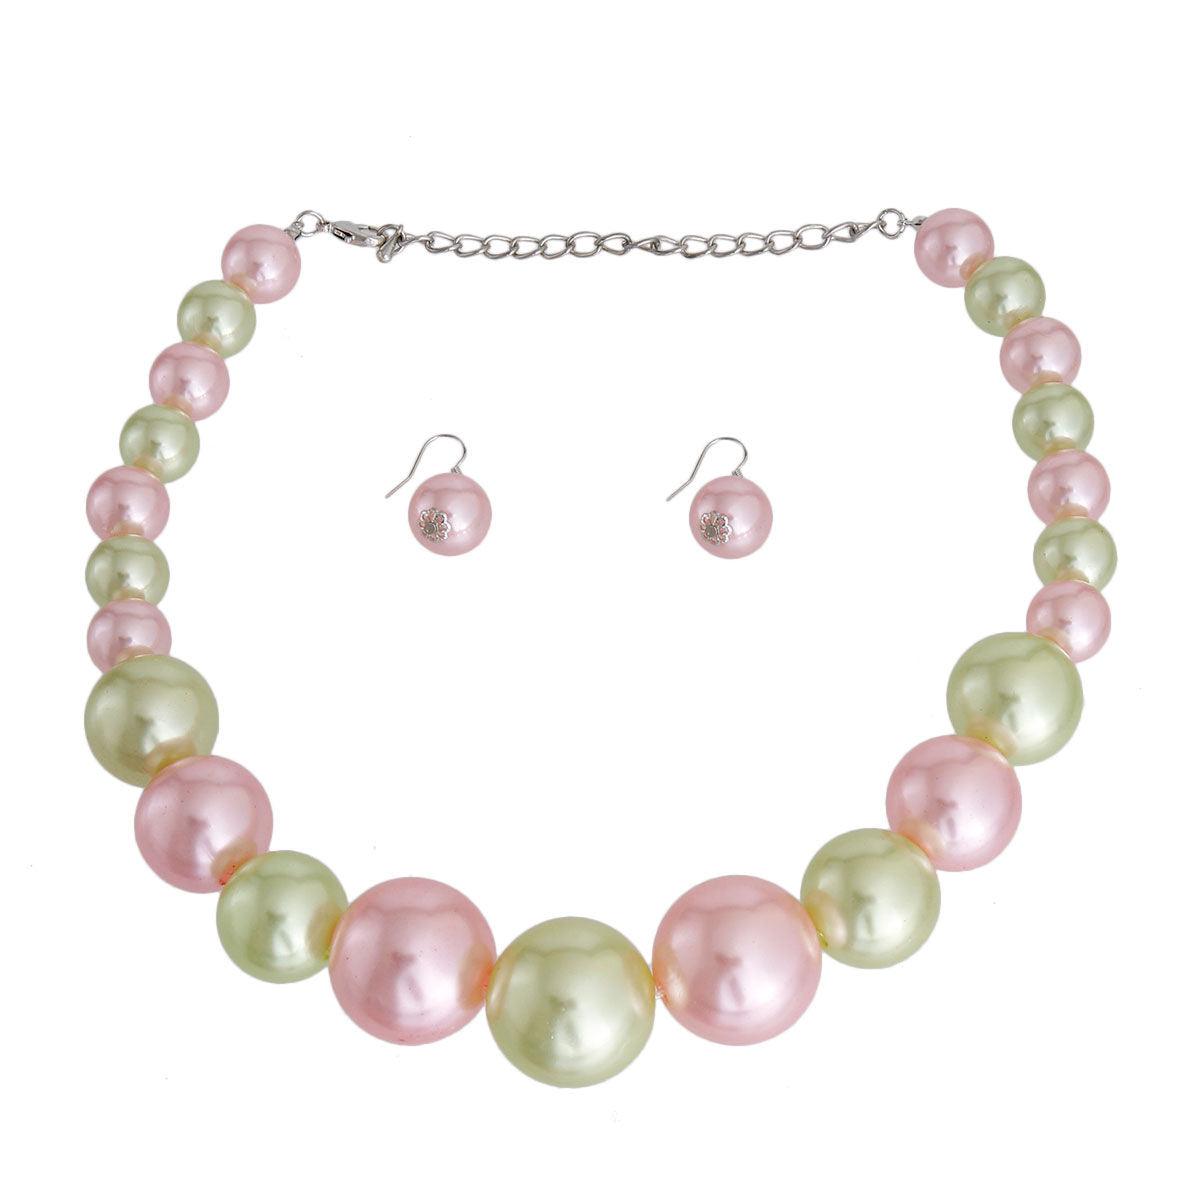 Necklace and Earrings Set with Pink and Green Faux Pearls